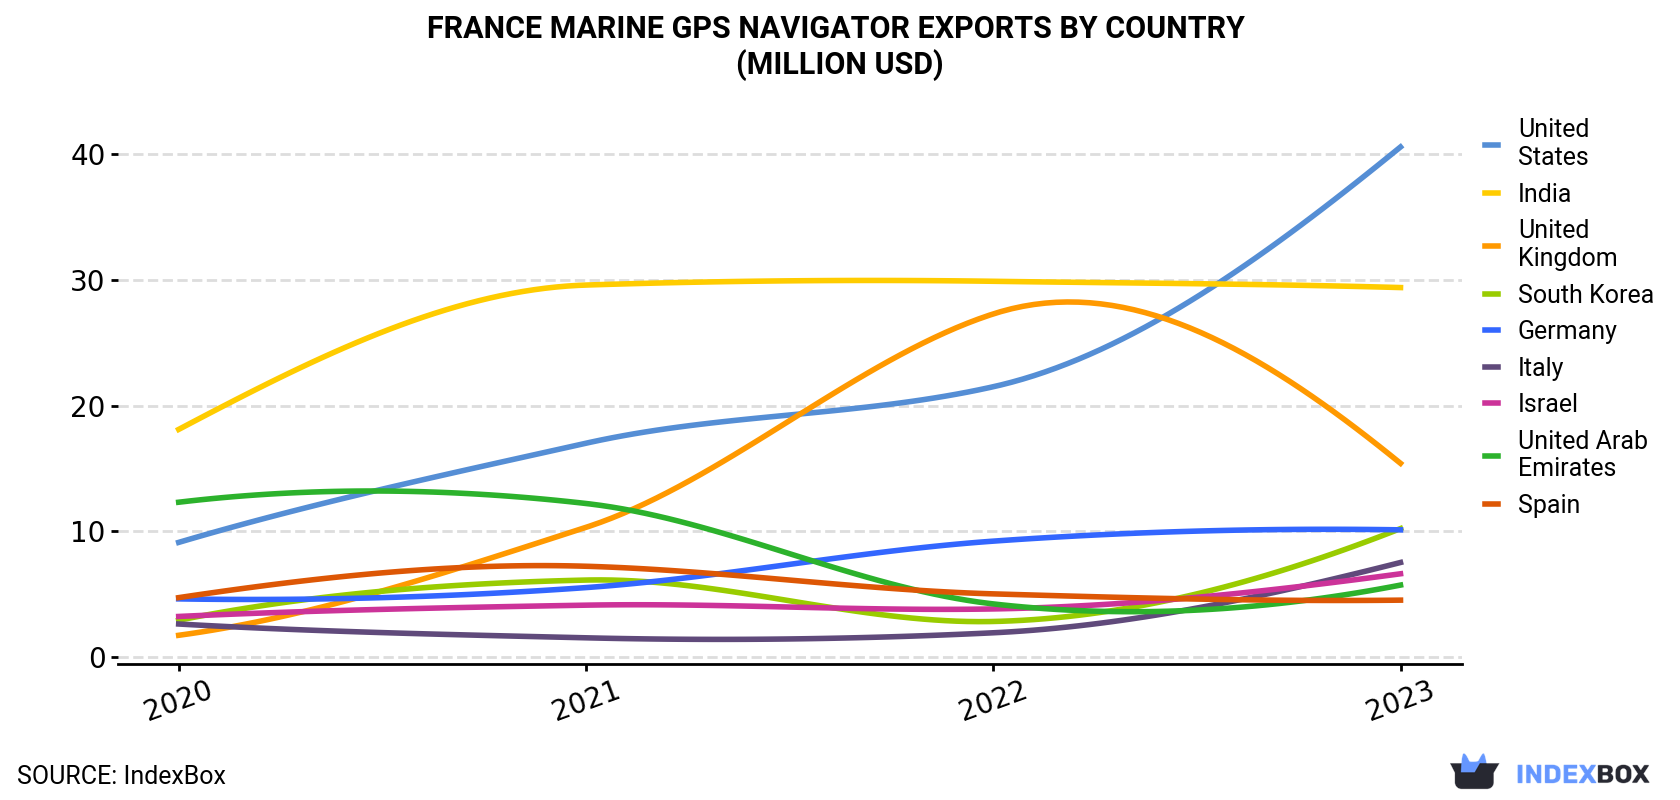 France Marine GPS Navigator Exports By Country (Million USD)